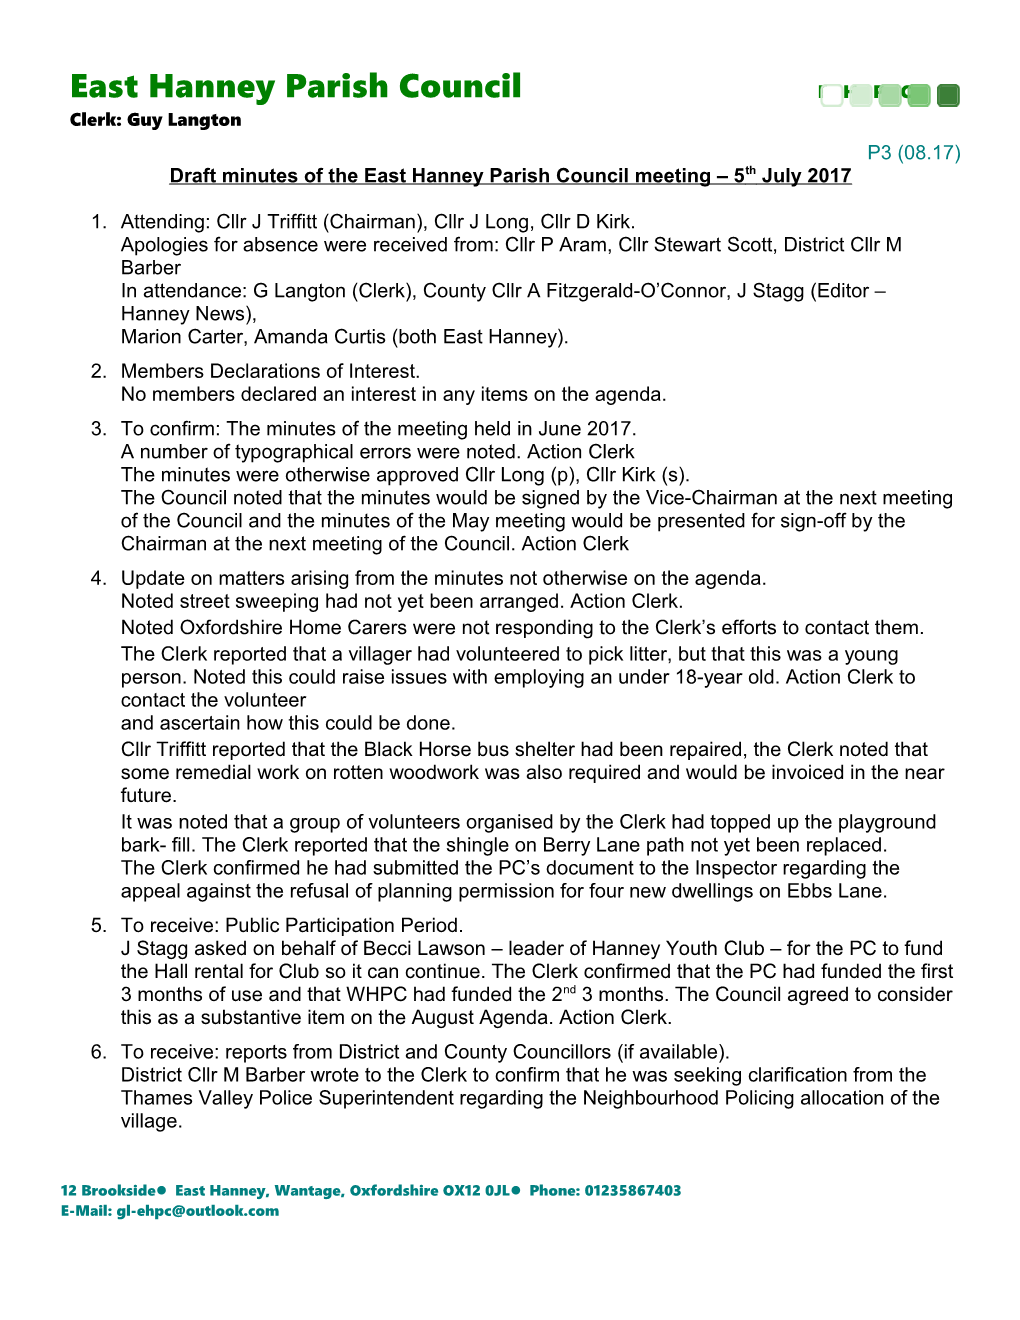 Draft Minutes of the East Hanney Parish Council Meeting 5Th July 2017